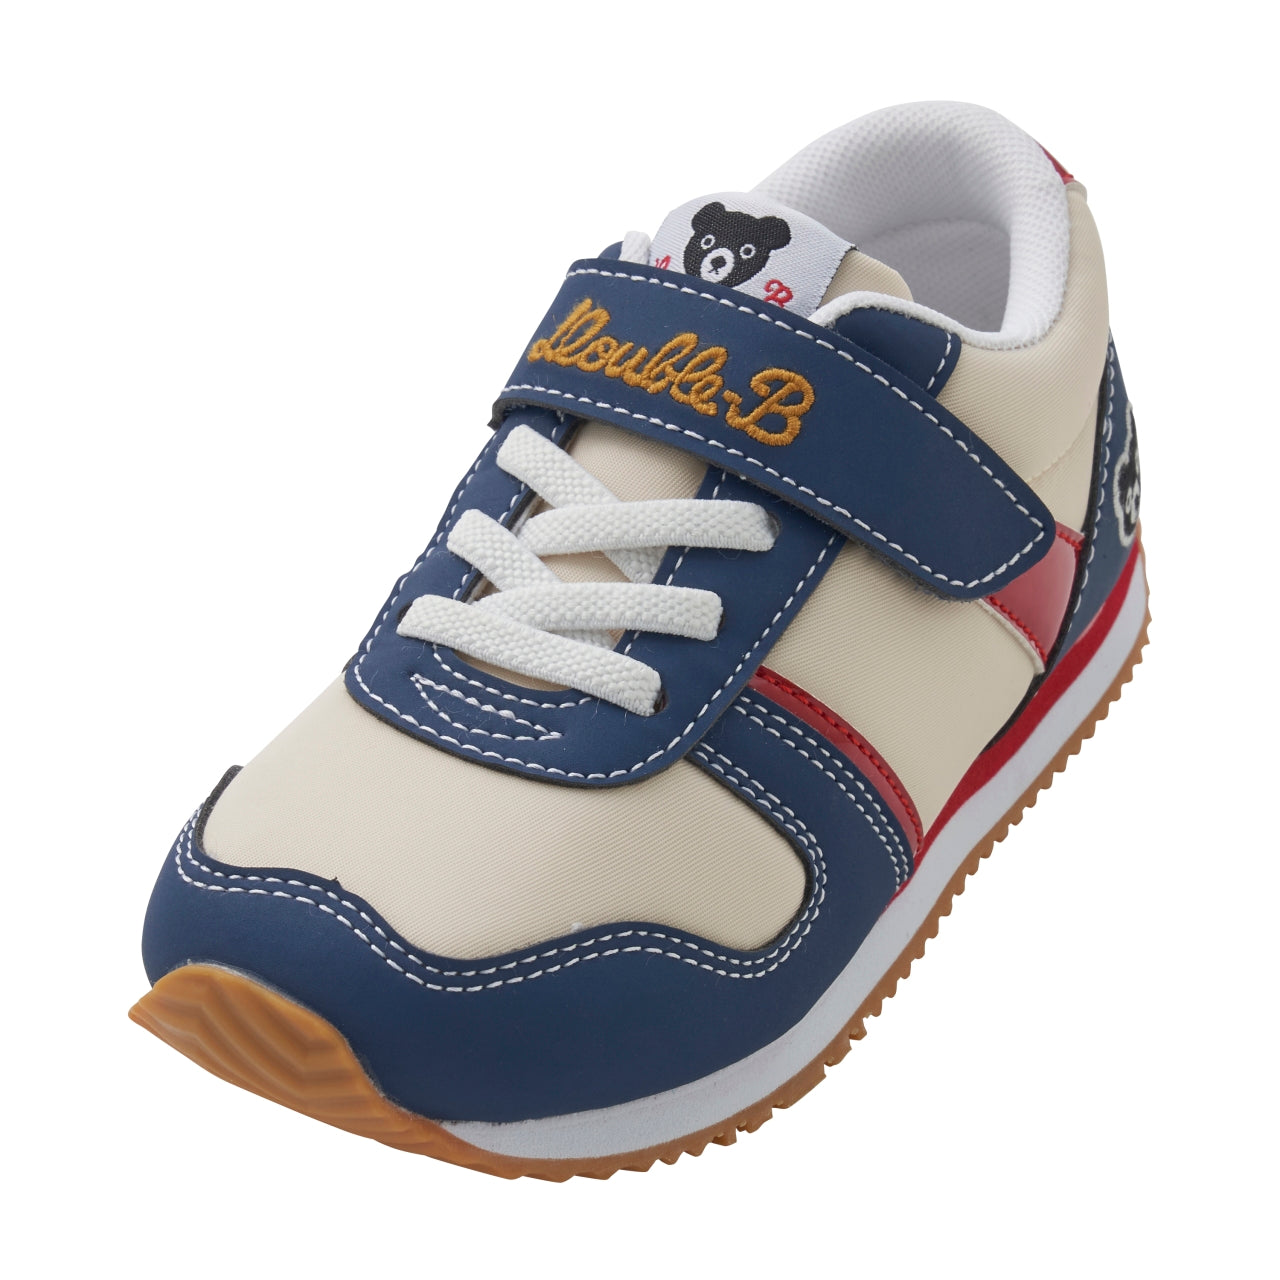 Retro Shoes for Kids